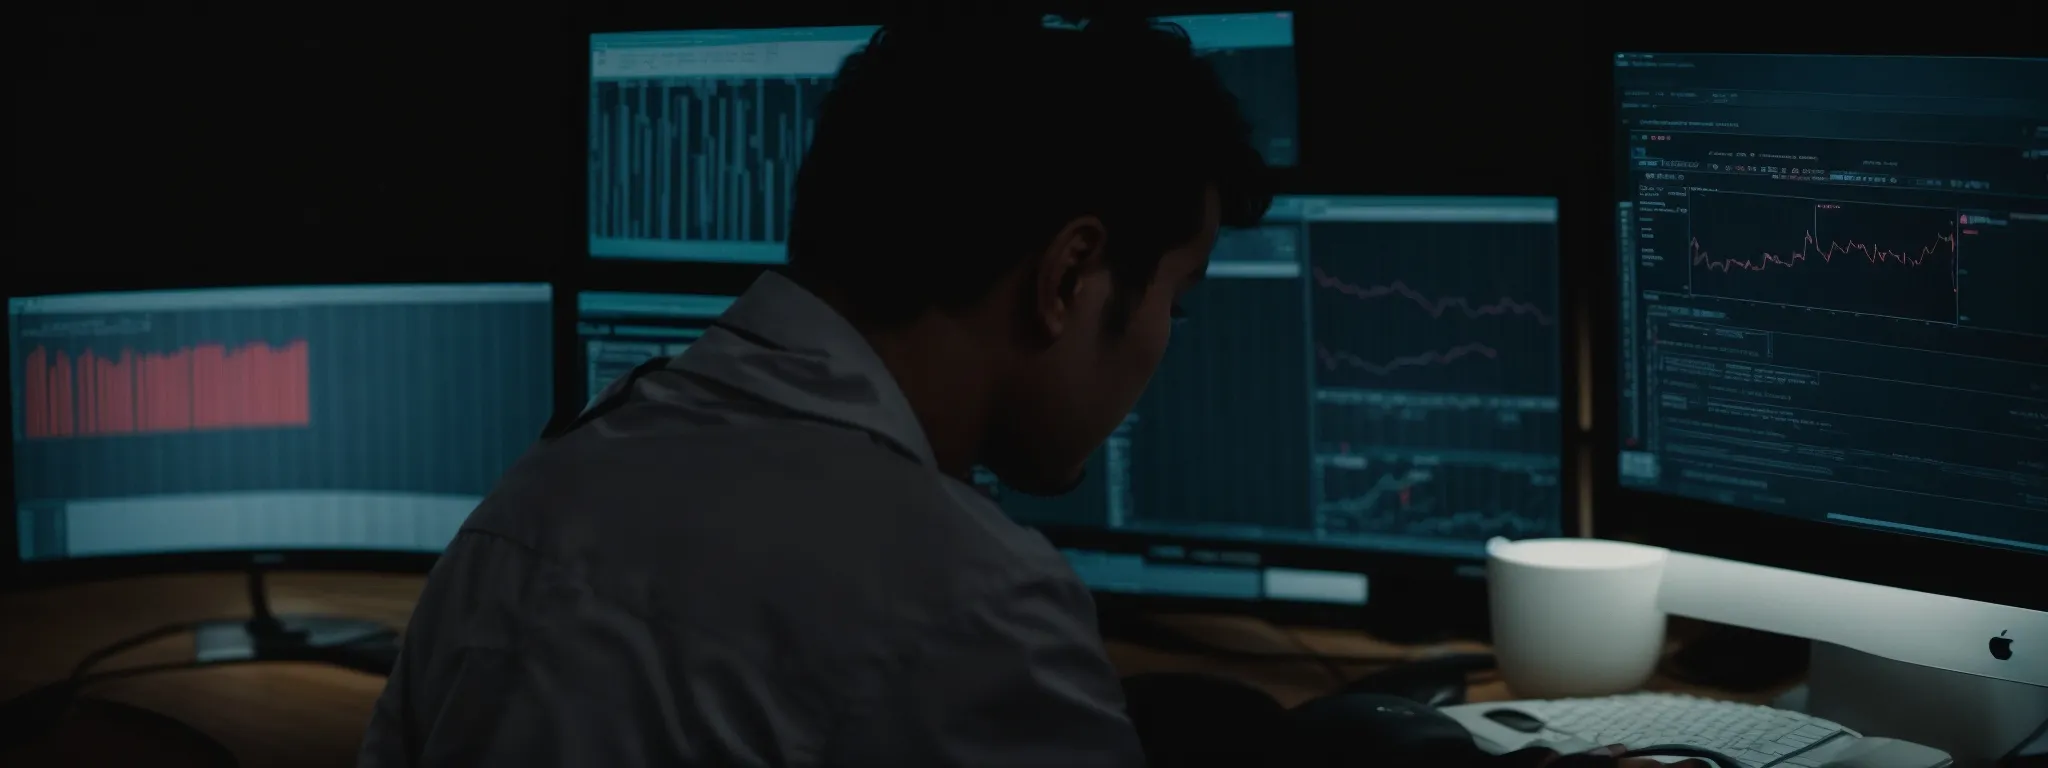 a person sitting at a computer with an open dashboard of keyword research analytics on the screen.